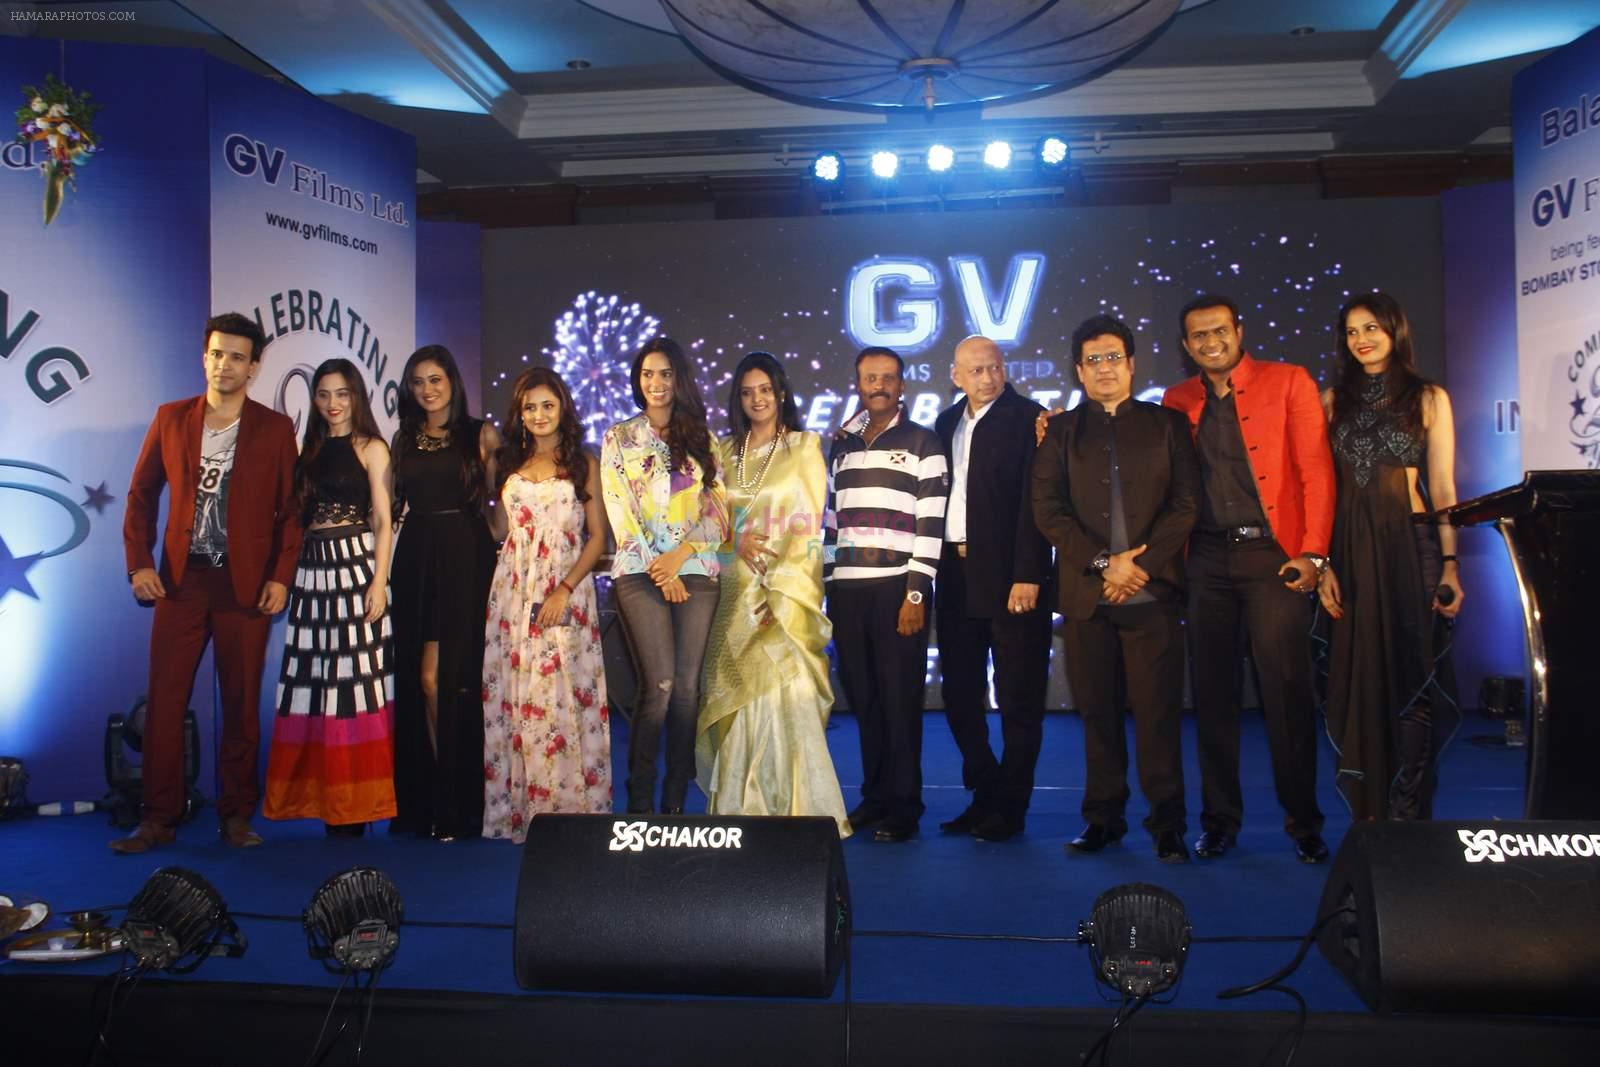 Mallika Sherawat at GV Films completion of 25 years and launch of their new website in J W Marriott on 1st Aug 2015